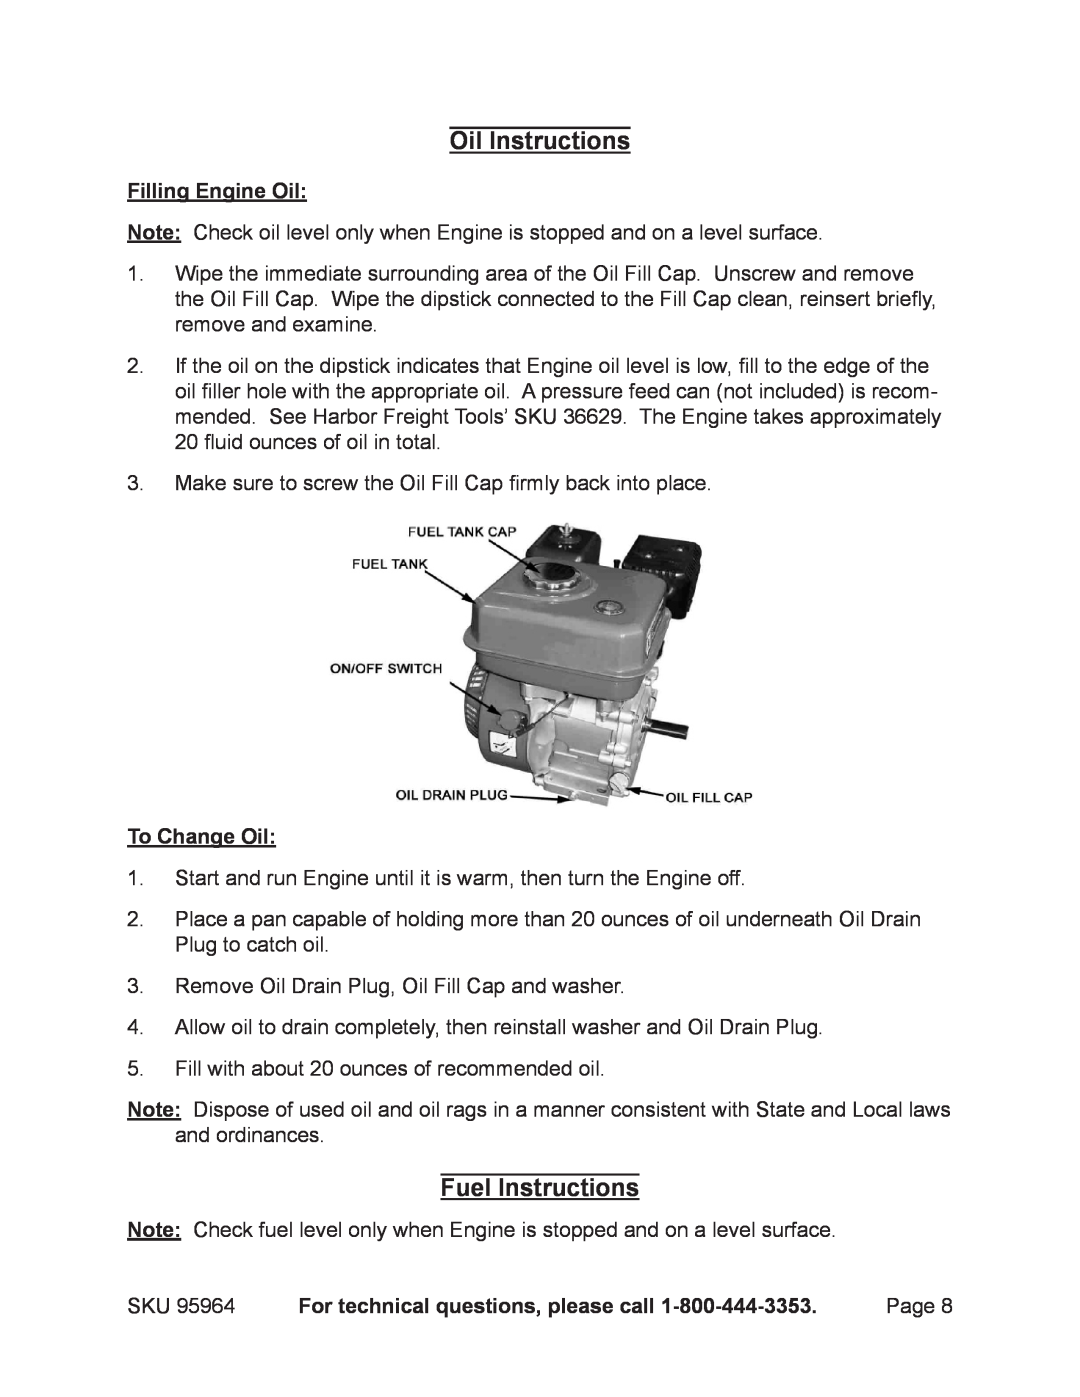 Harbor Freight Tools 95964 operating instructions Oil Instructions, Fuel Instructions, Filling Engine Oil, To Change Oil 